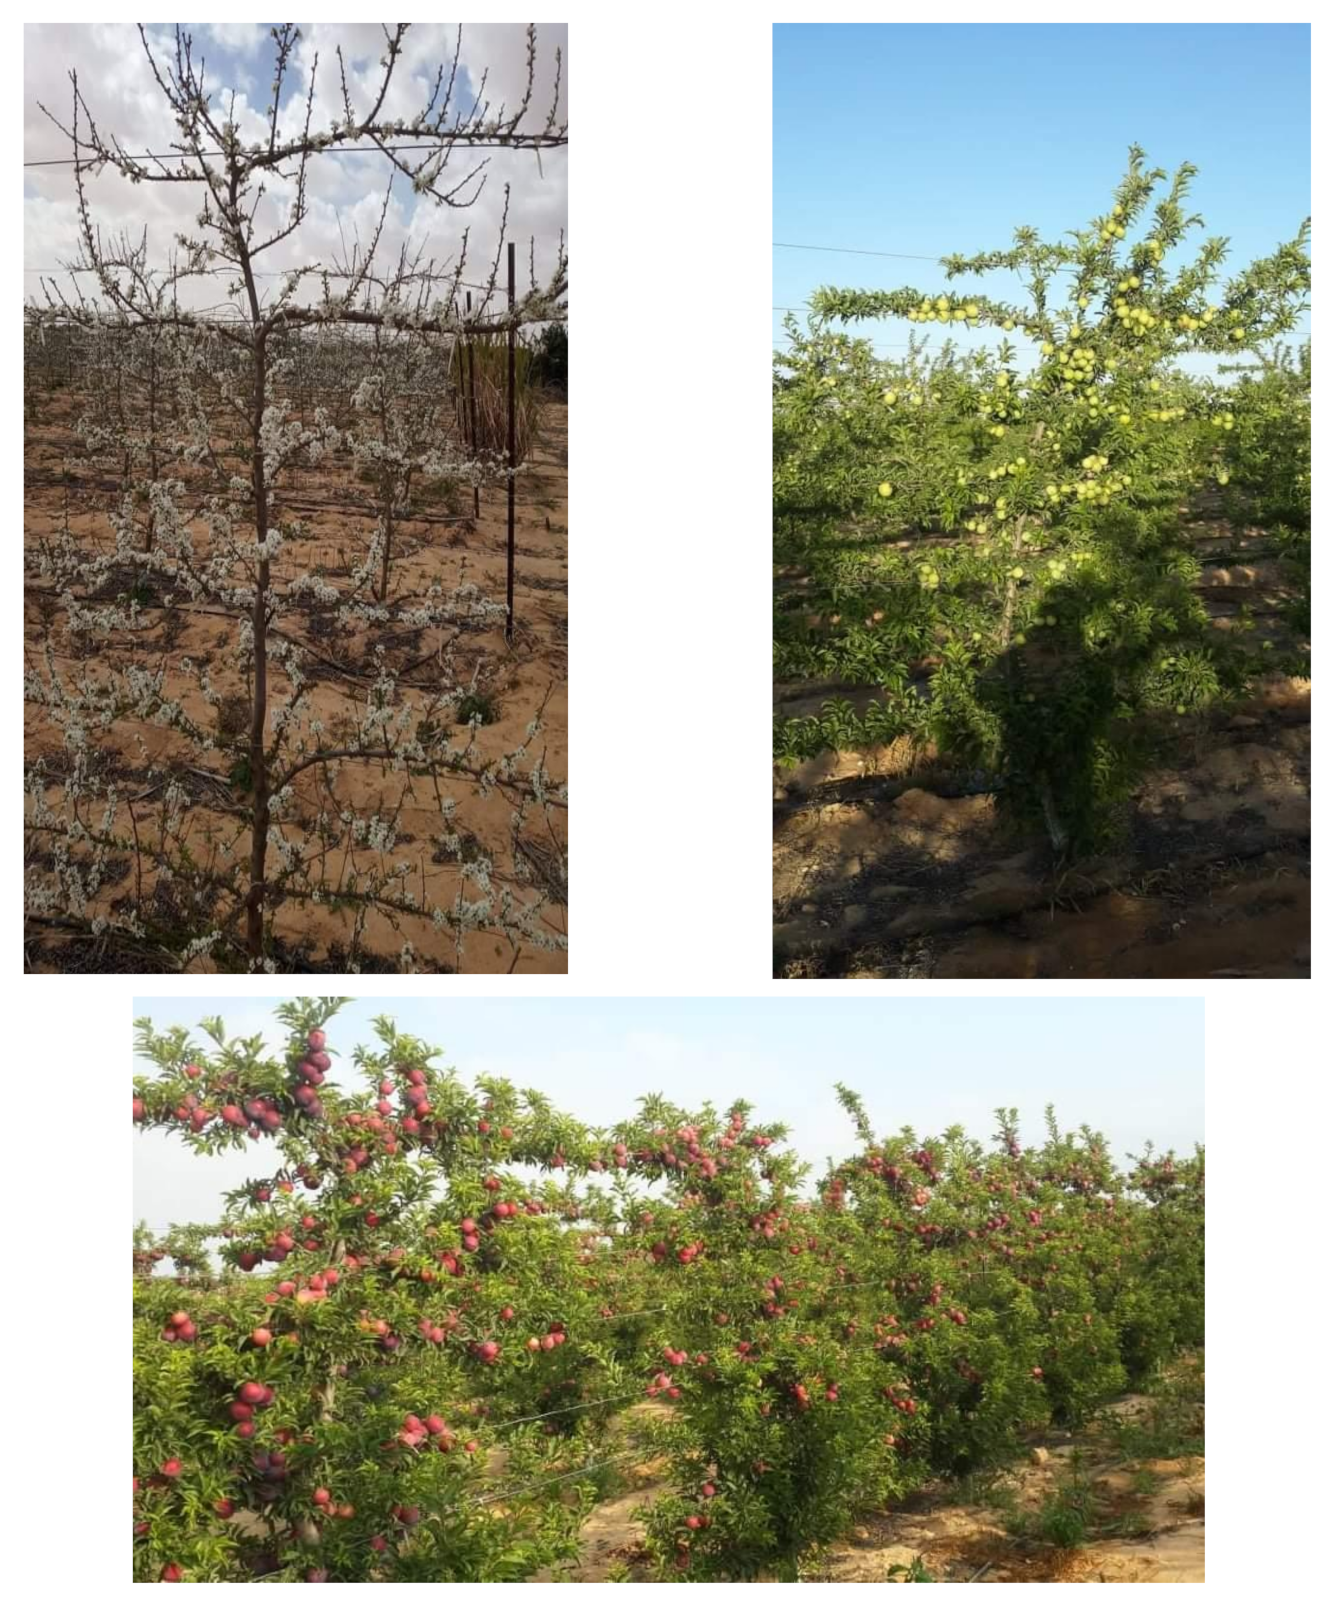 Agronomy | Free Full-Text | Deficit Irrigation to Enhance Fruit Quality of  the 'African Rose' Plum under the Egyptian Semi-Arid Conditions | HTML